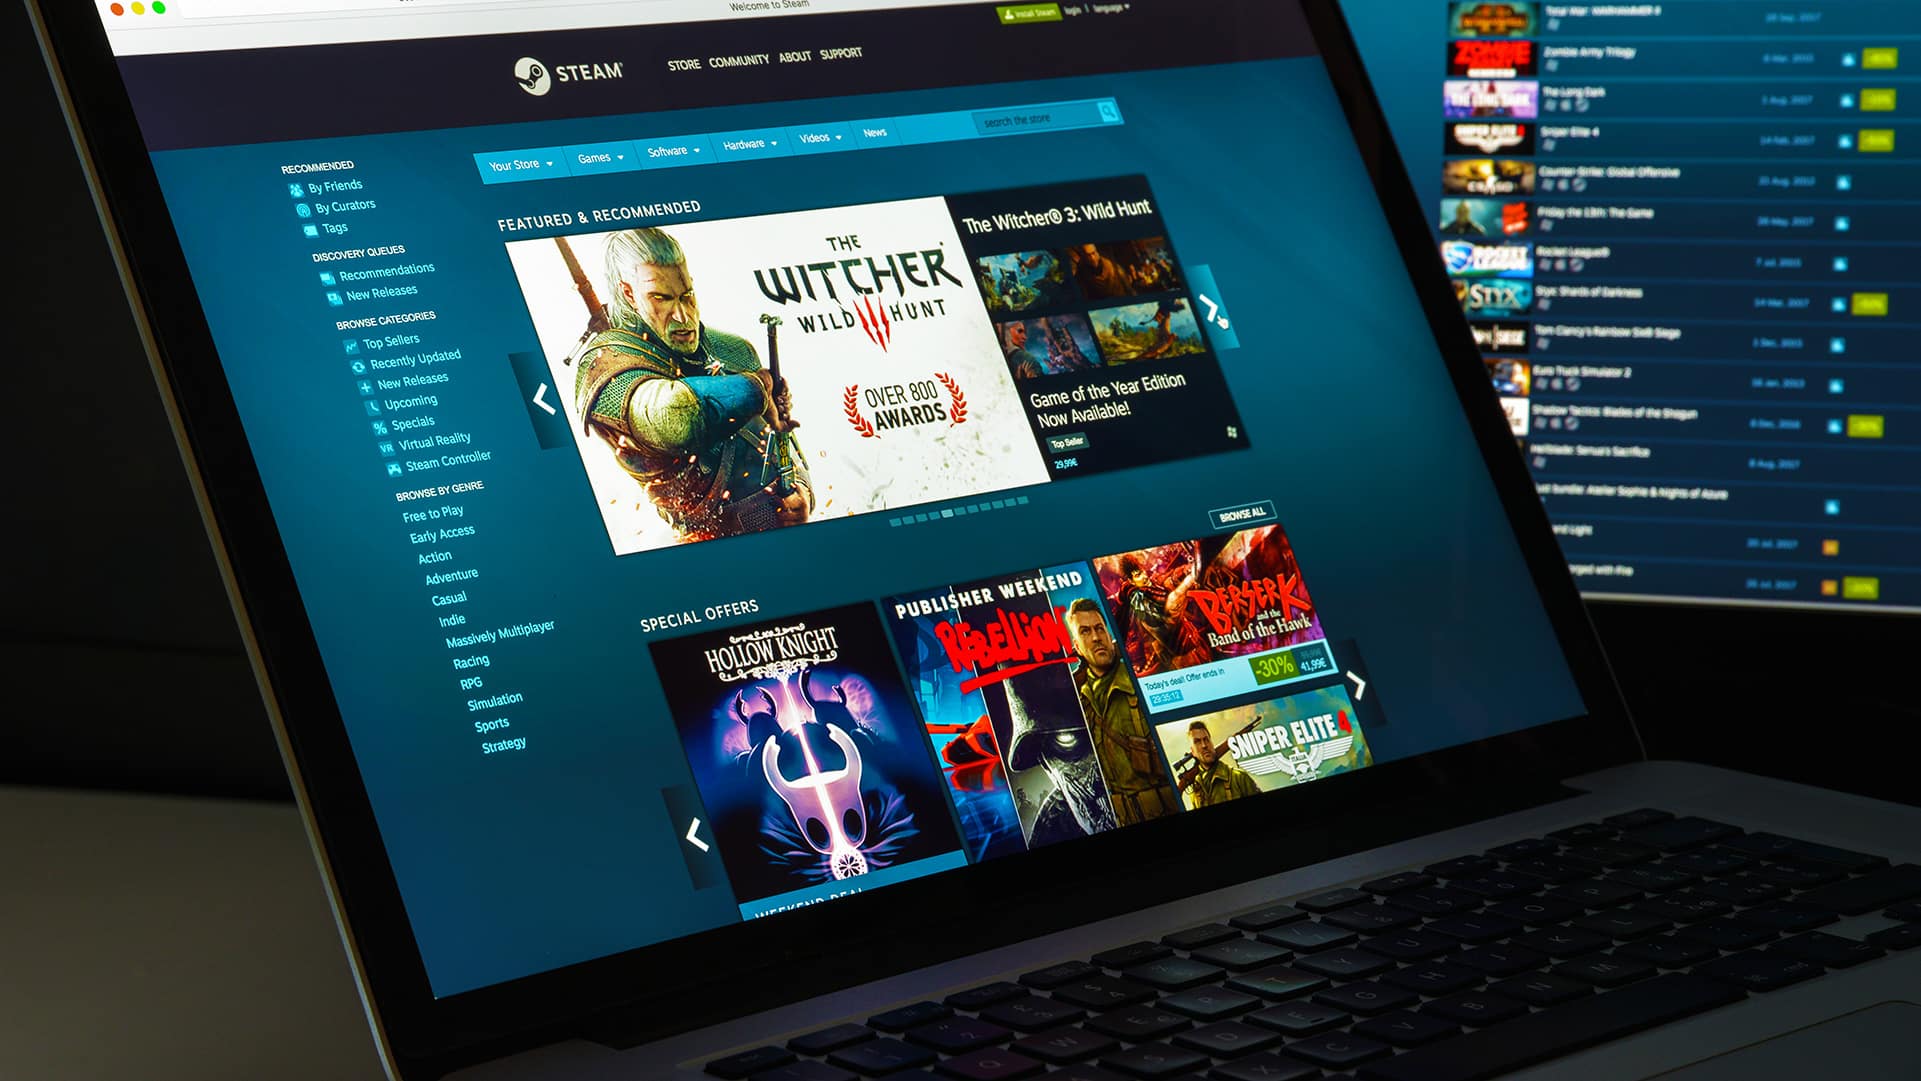 Why Microsoft Store will never be able to compete with Steam and why this  is bad